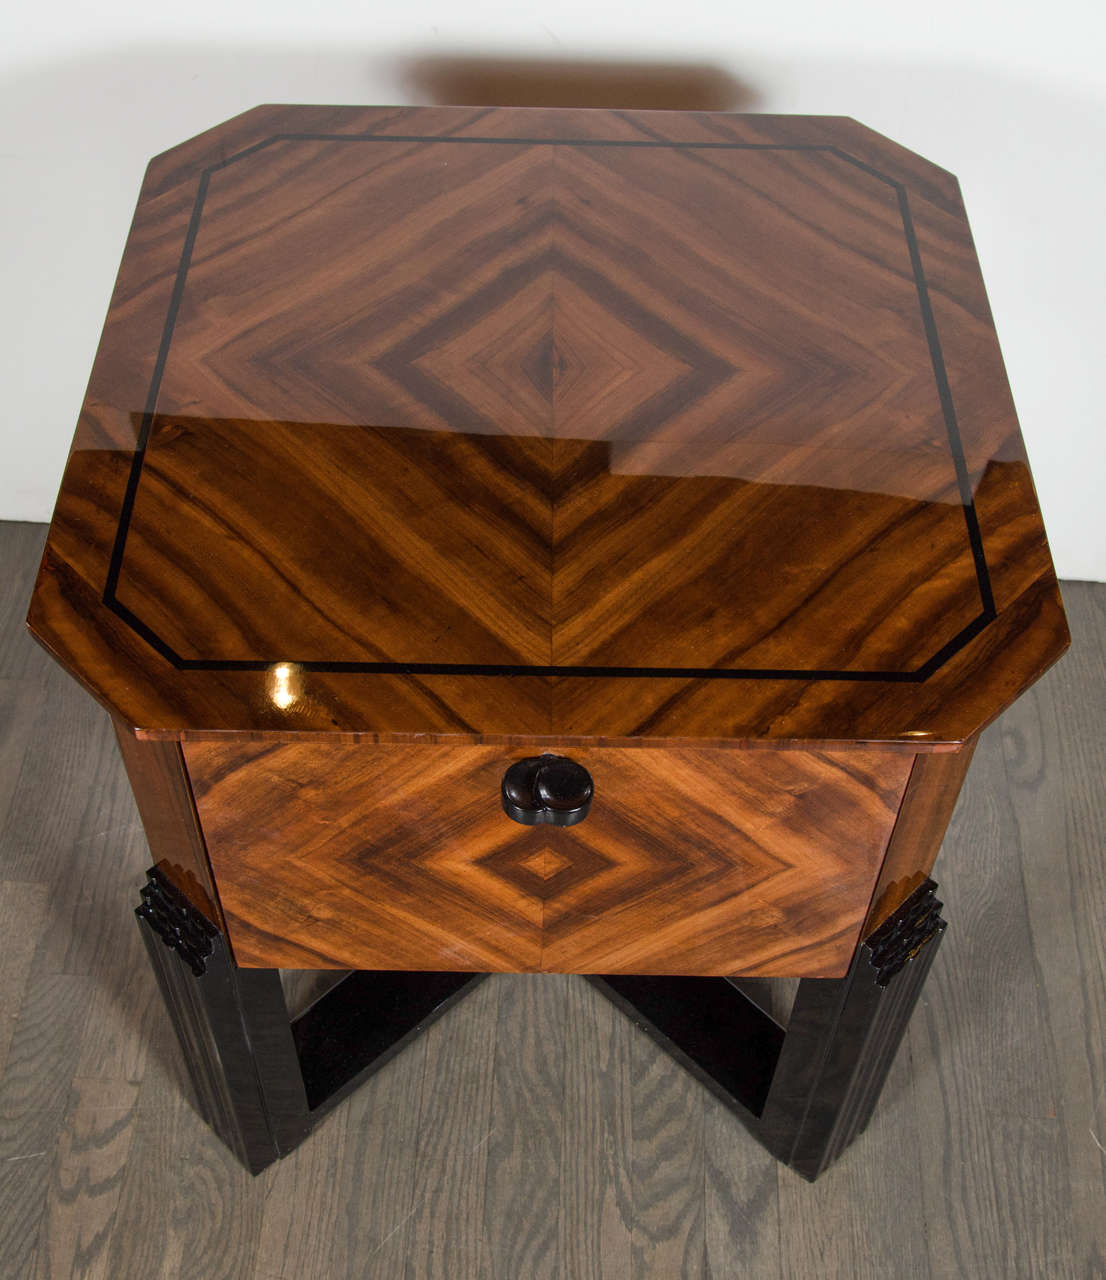 Mid-20th Century Impressive Art Deco Bar Table with Drop-Down Doors and Bookmatched Walnut Inlay